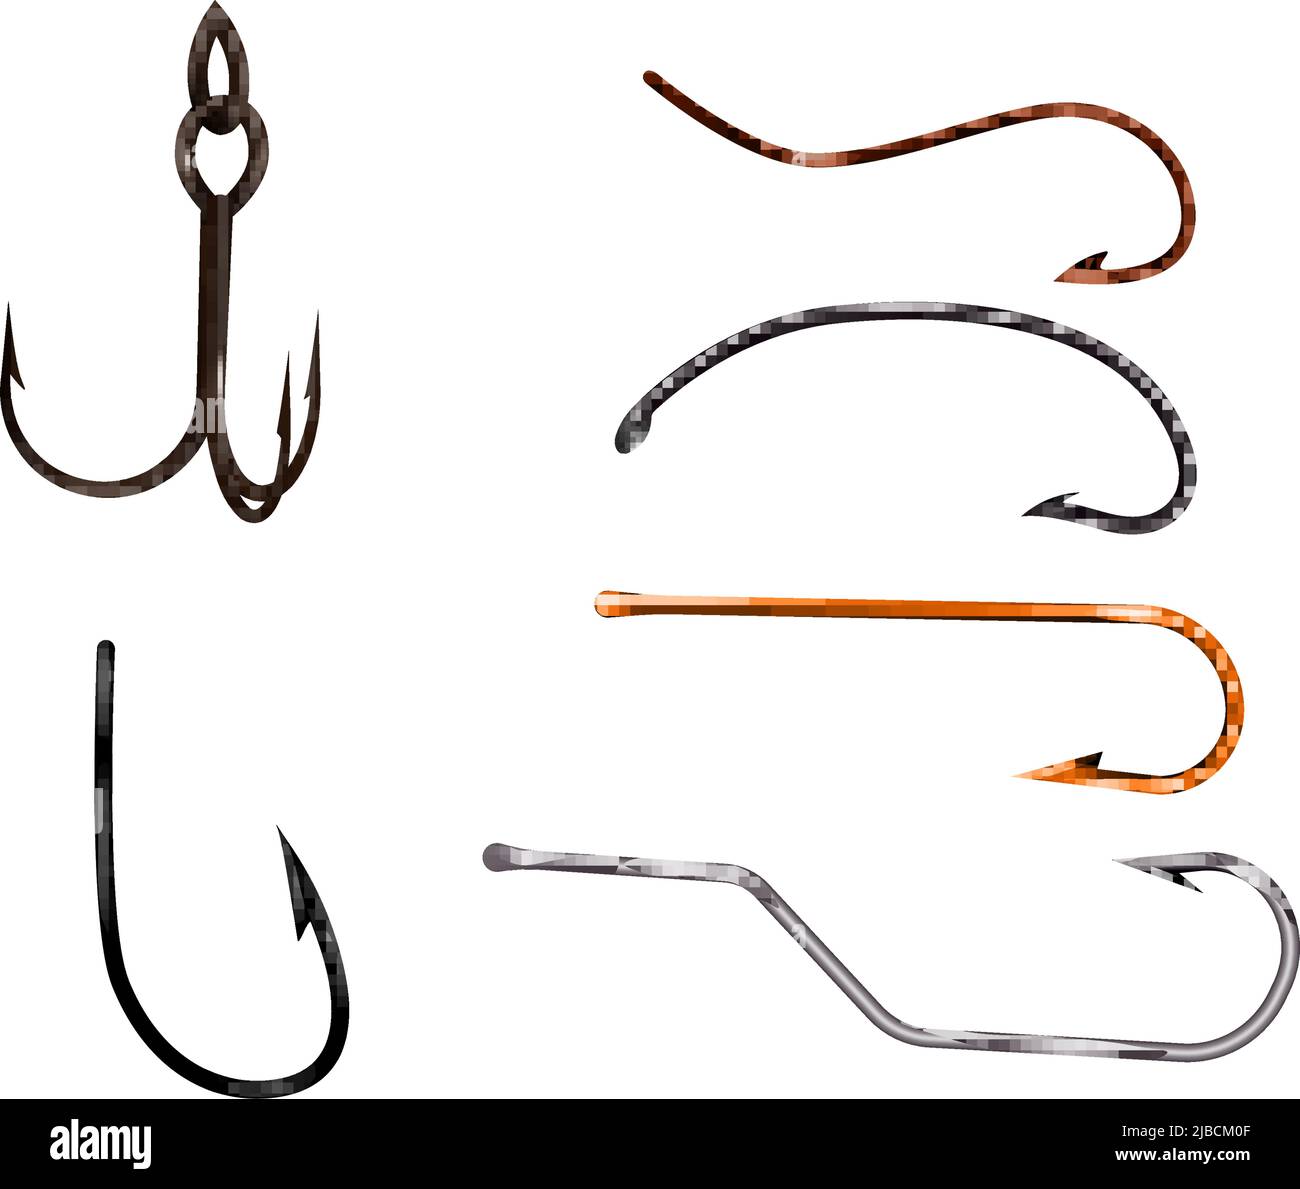 Different kinds of the fishing plastic baits with ink drawing fish on the  white background Stock Photo - Alamy